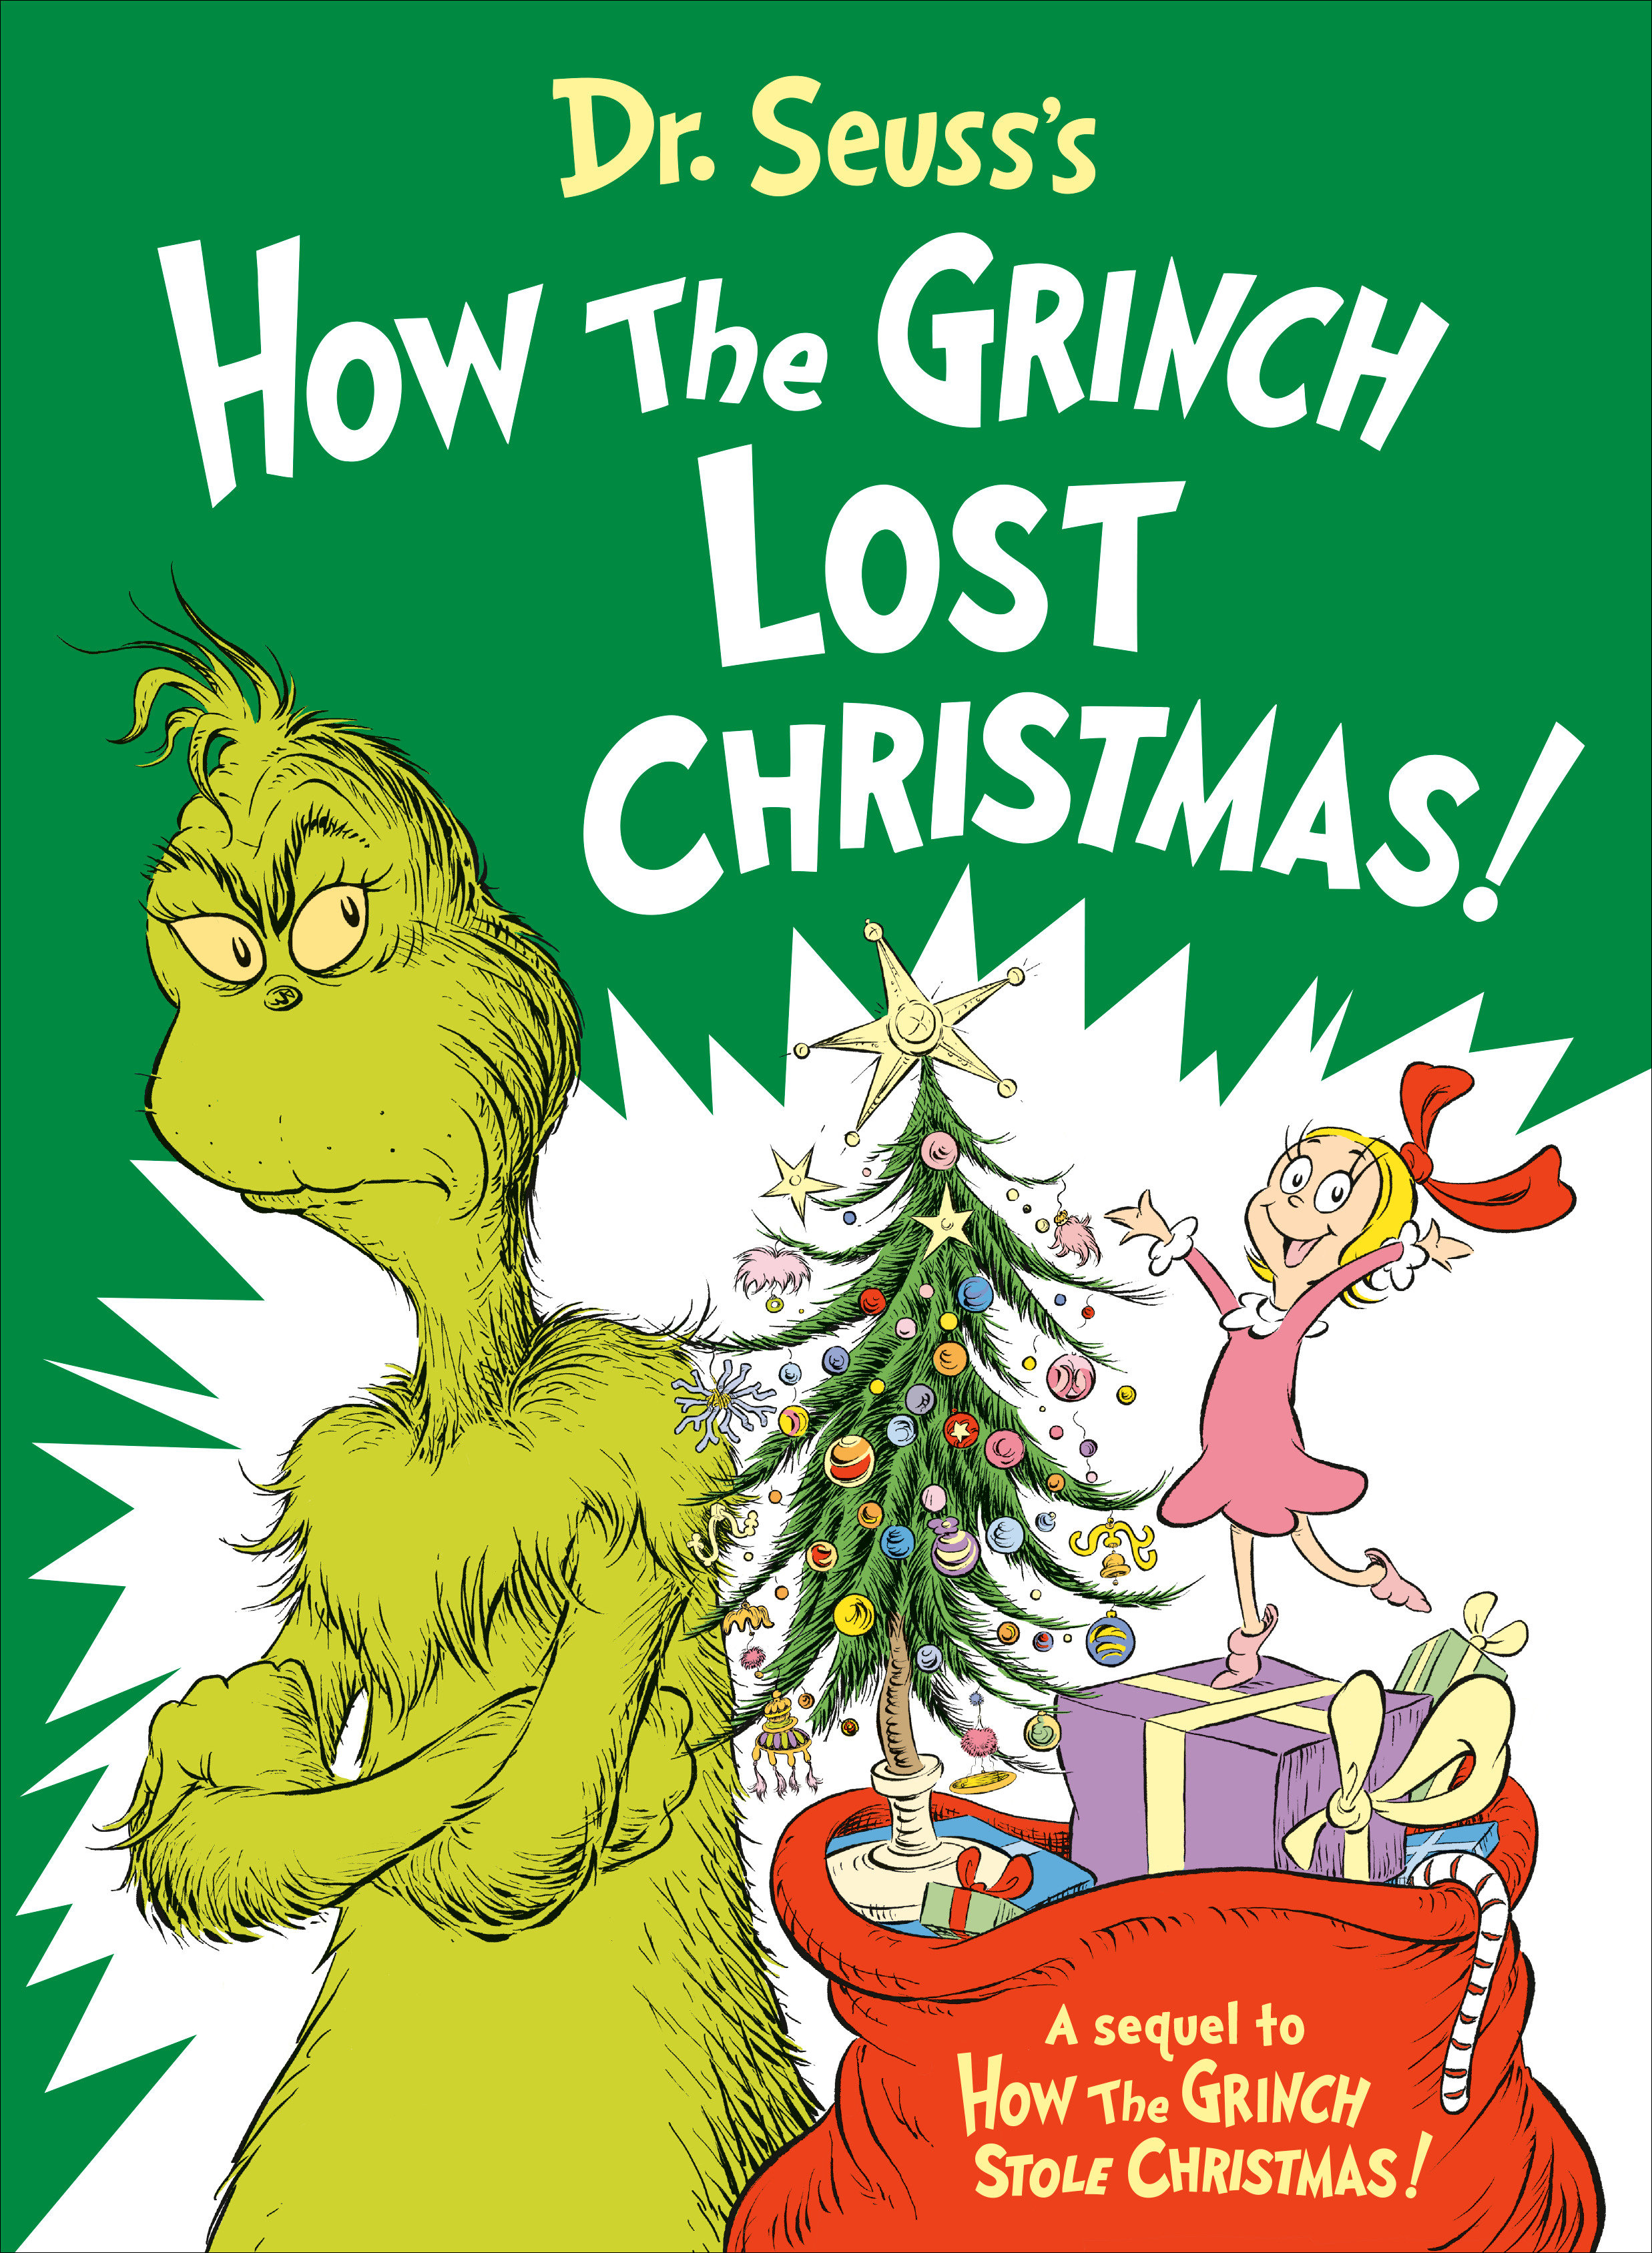 Dr. Seuss's How the Grinch Lost Christmas! (Hardcover)